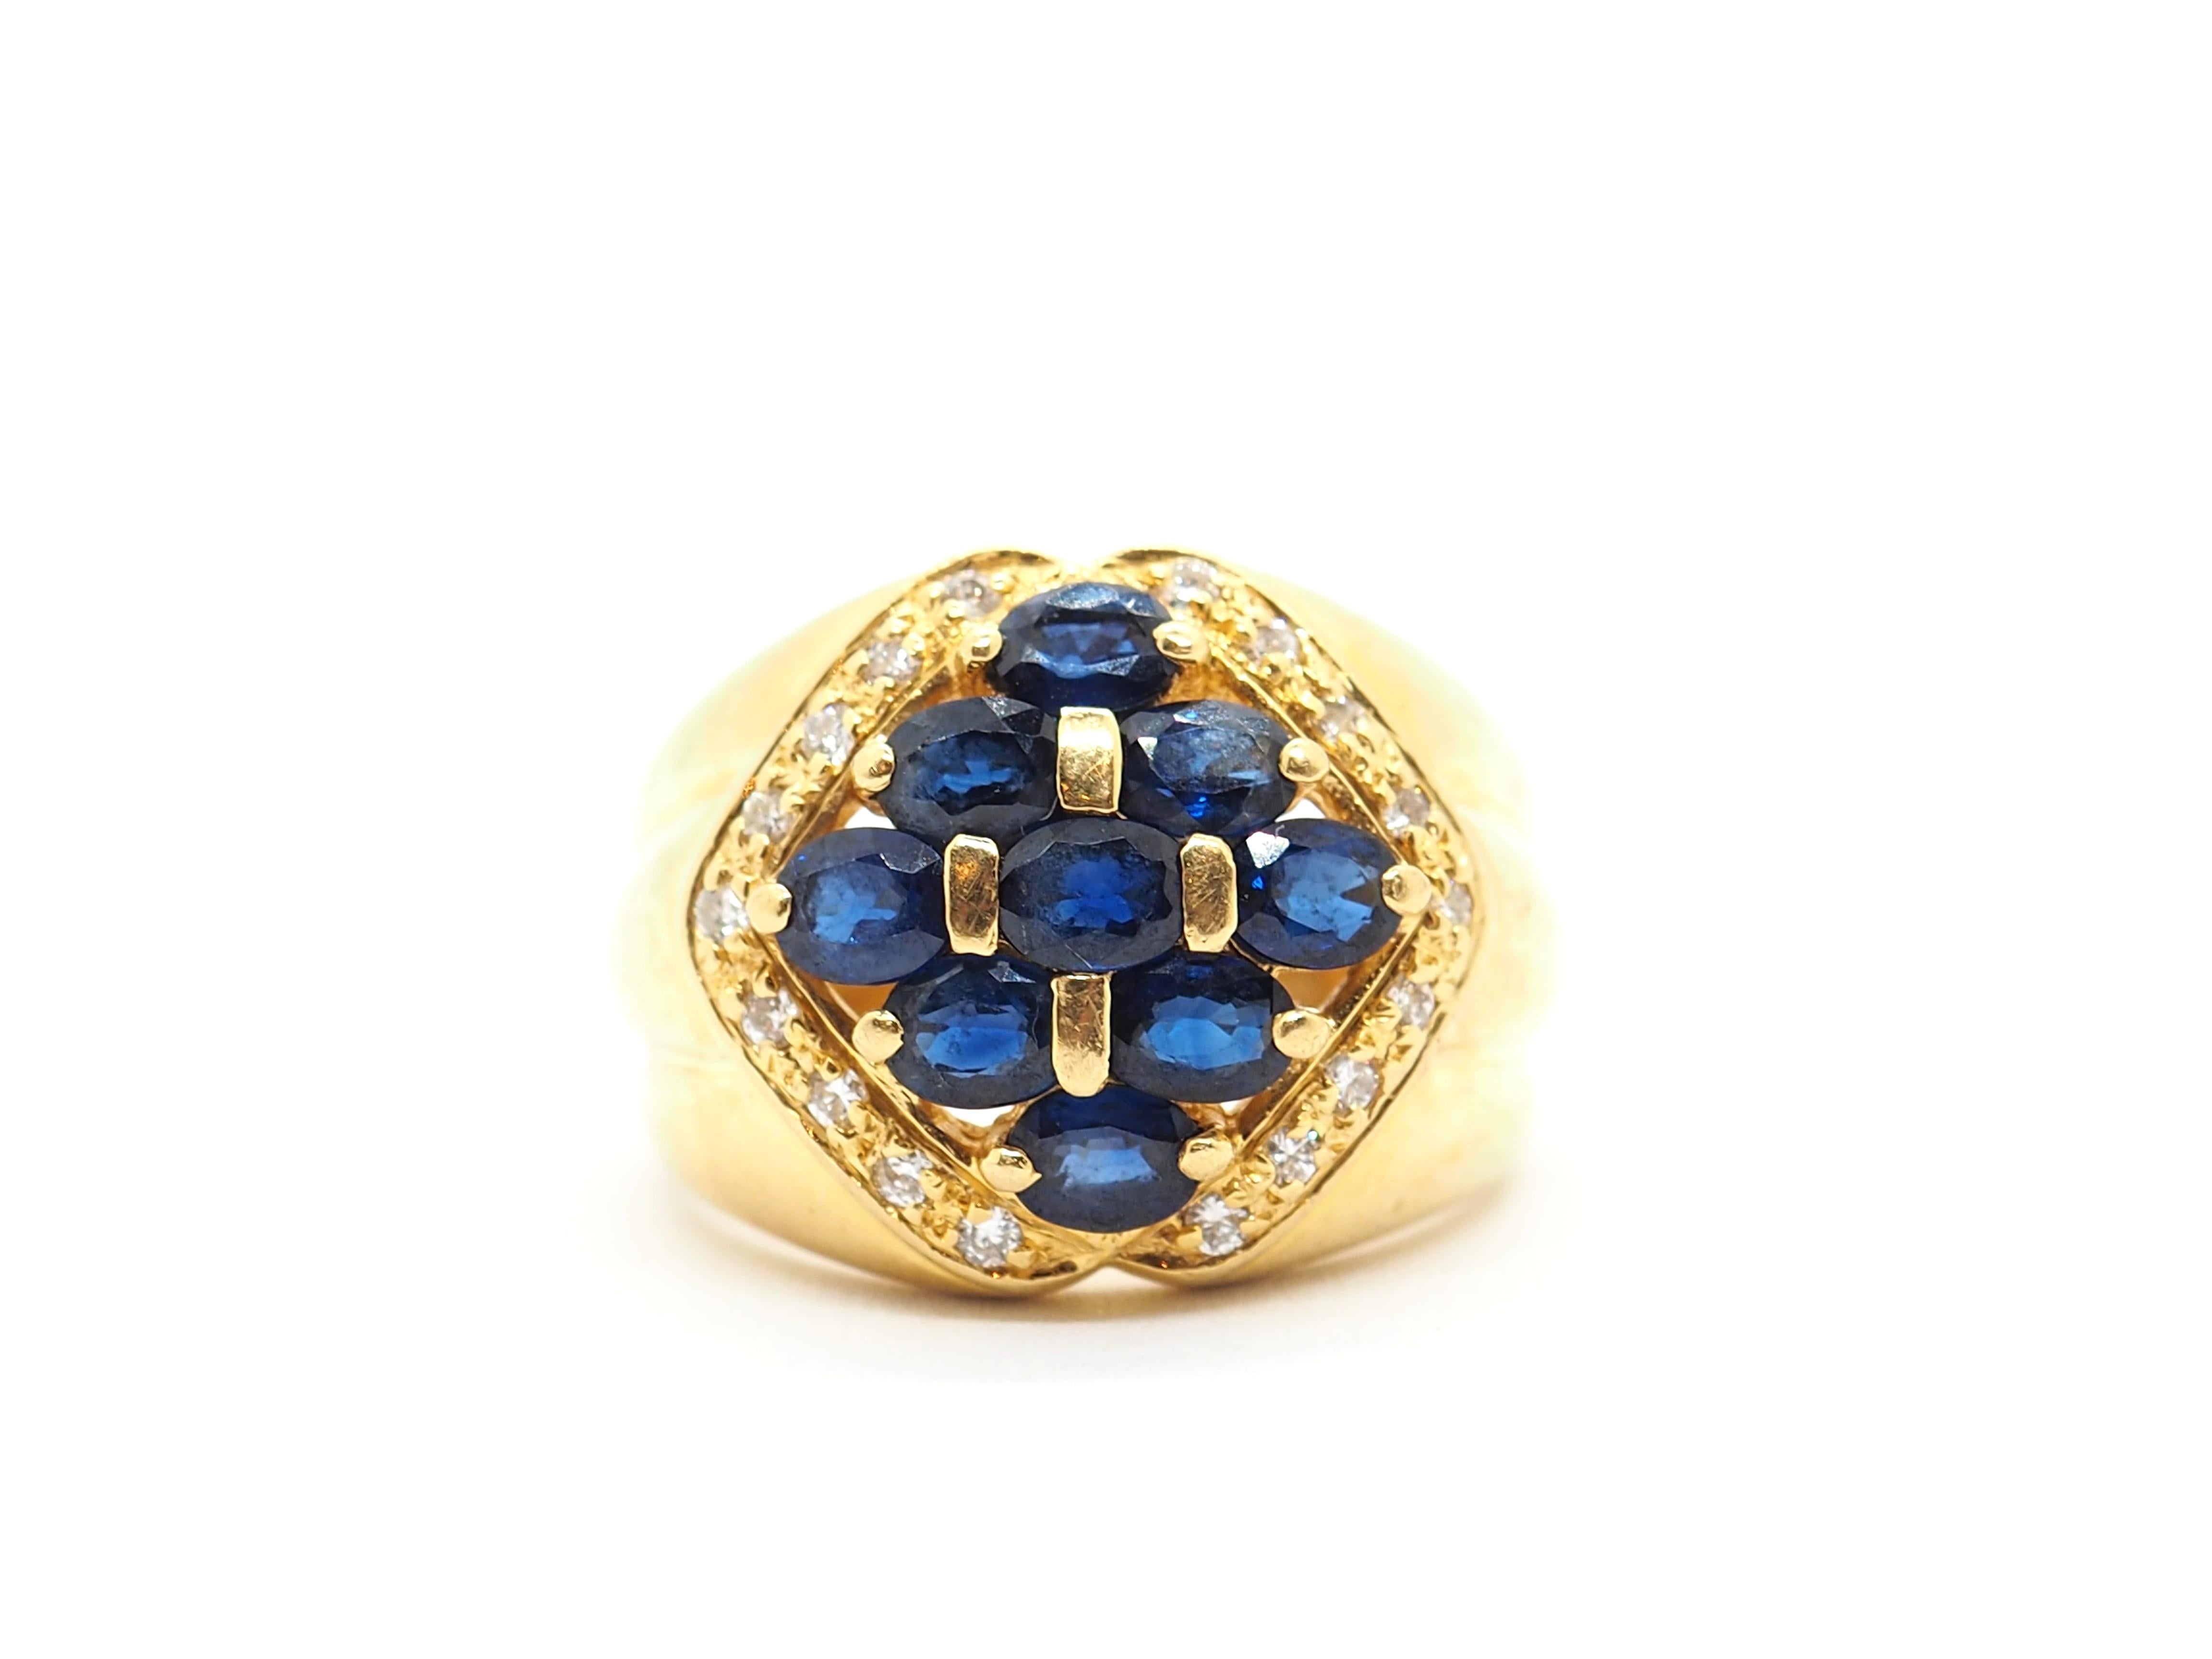 The ring made in 18k yellow gold and features a beautiful oval-shaped centerpiece comprised of nine sapphires in a deep, rich blue hue. The sapphires are arranged in a symmetrical pattern that creates a sense of balance and harmony.

Surrounding the